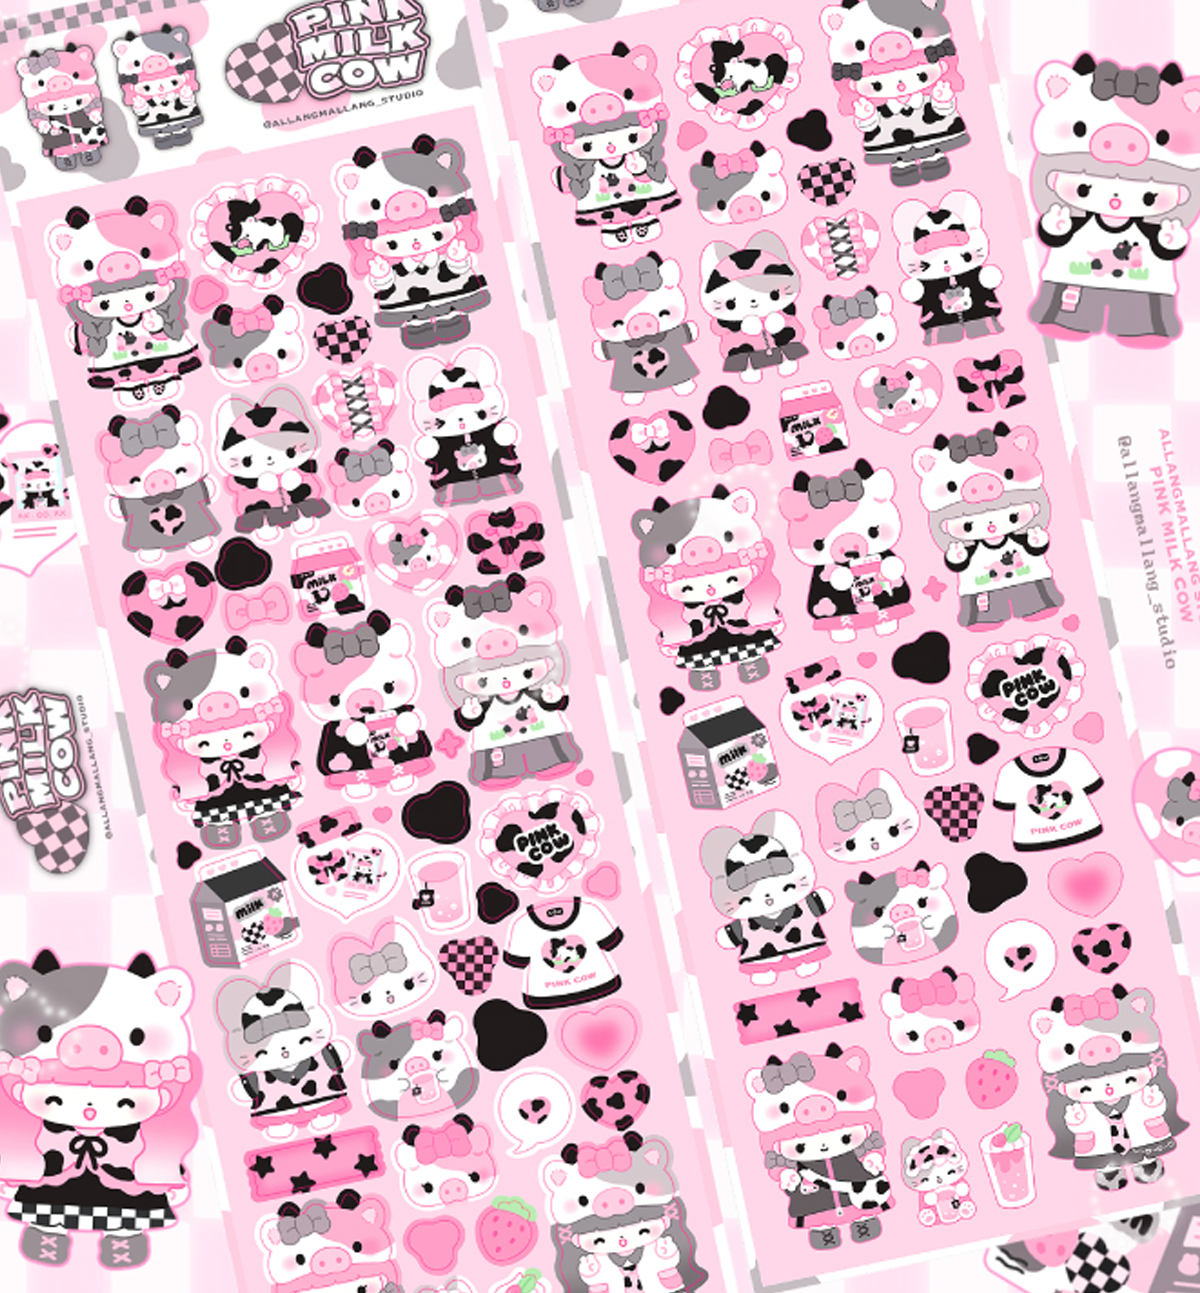 Moo Cow Print Wrapping Paper